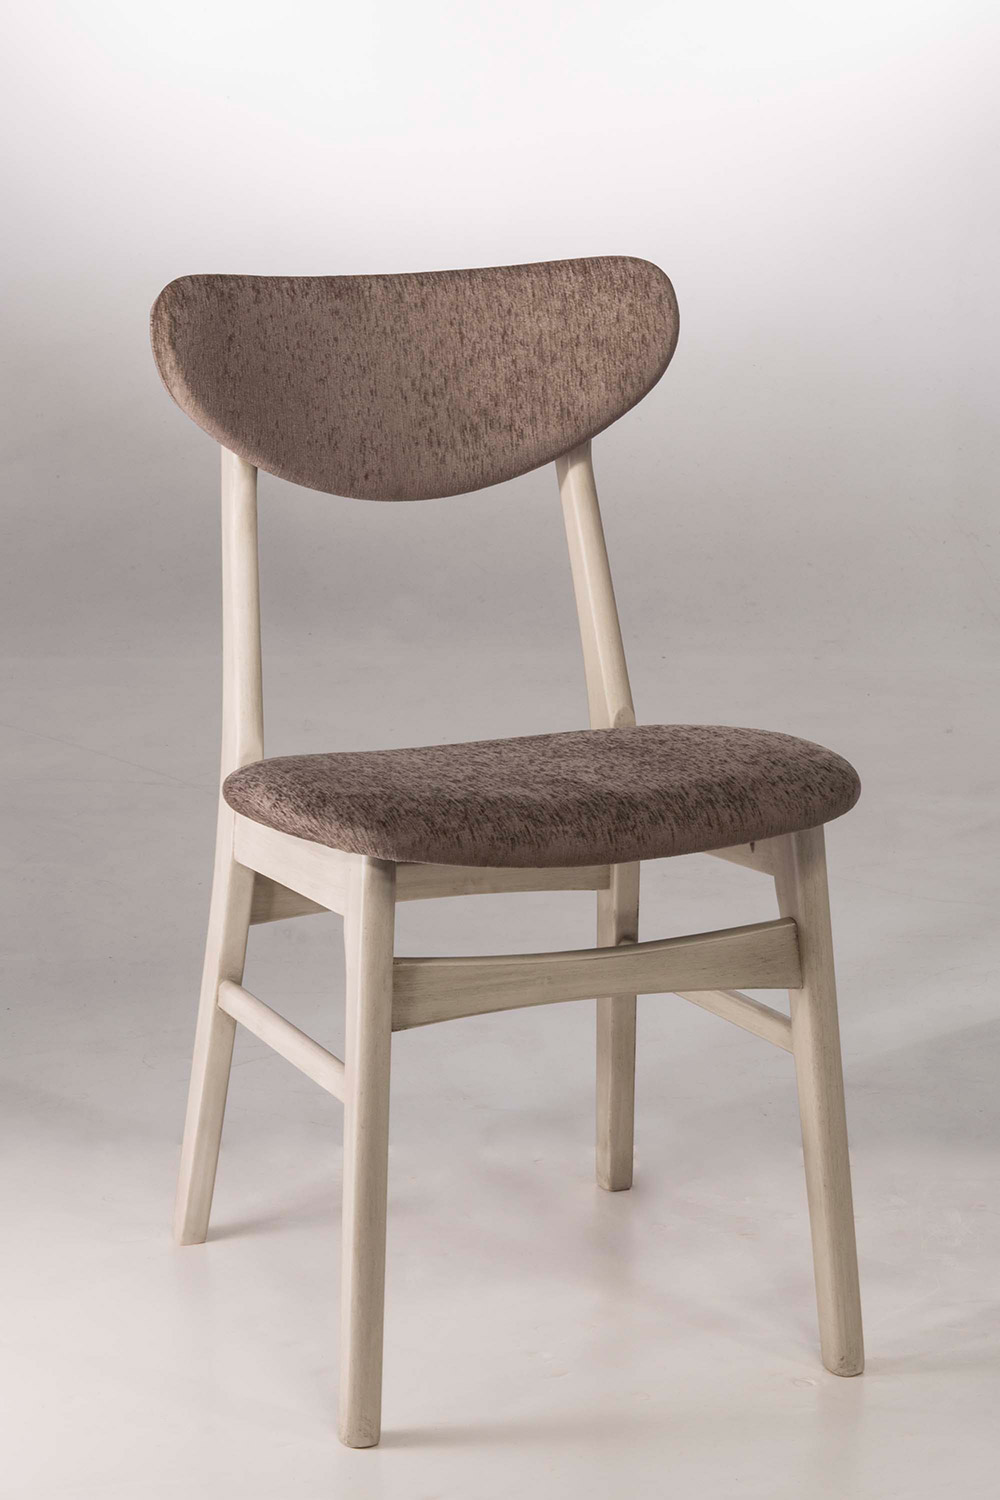 Hillsdale Bronx Dining Chair - Light Weathered Gray